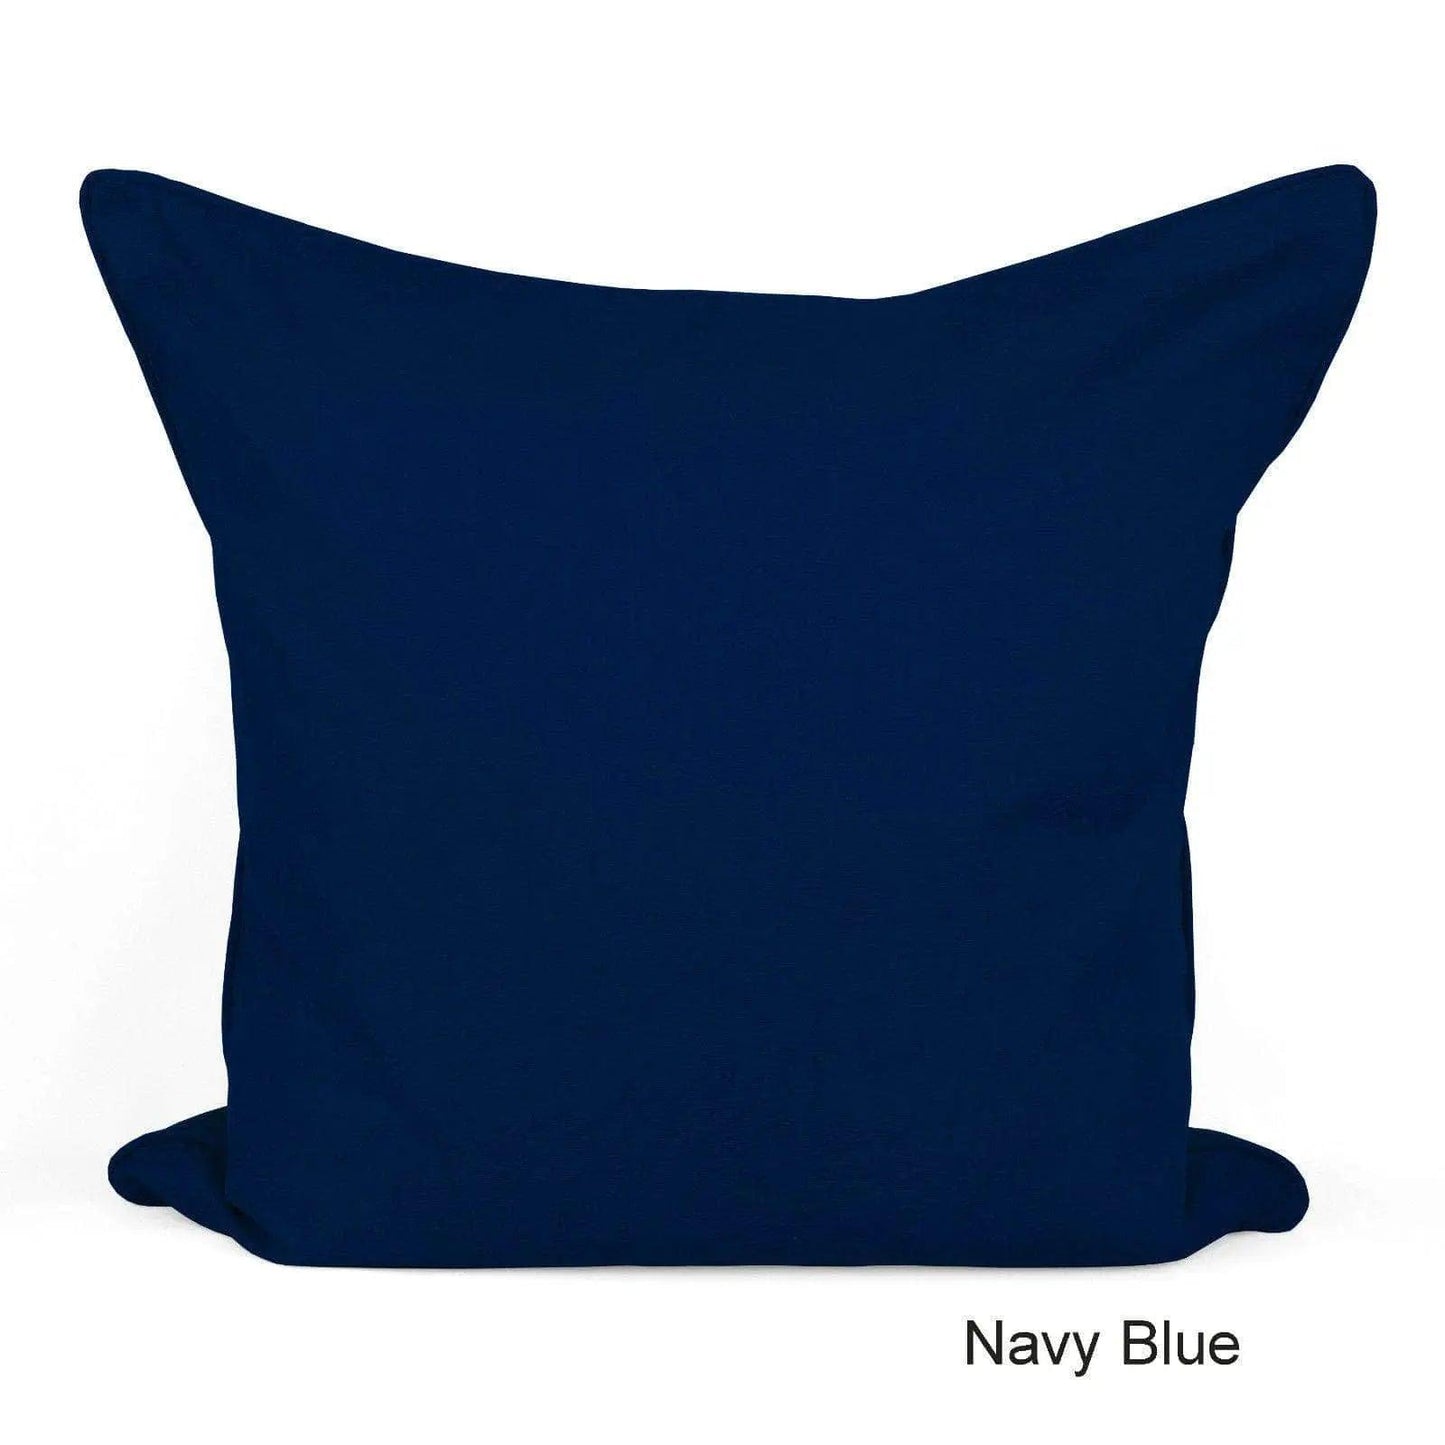 a navy blue pillow on a white background